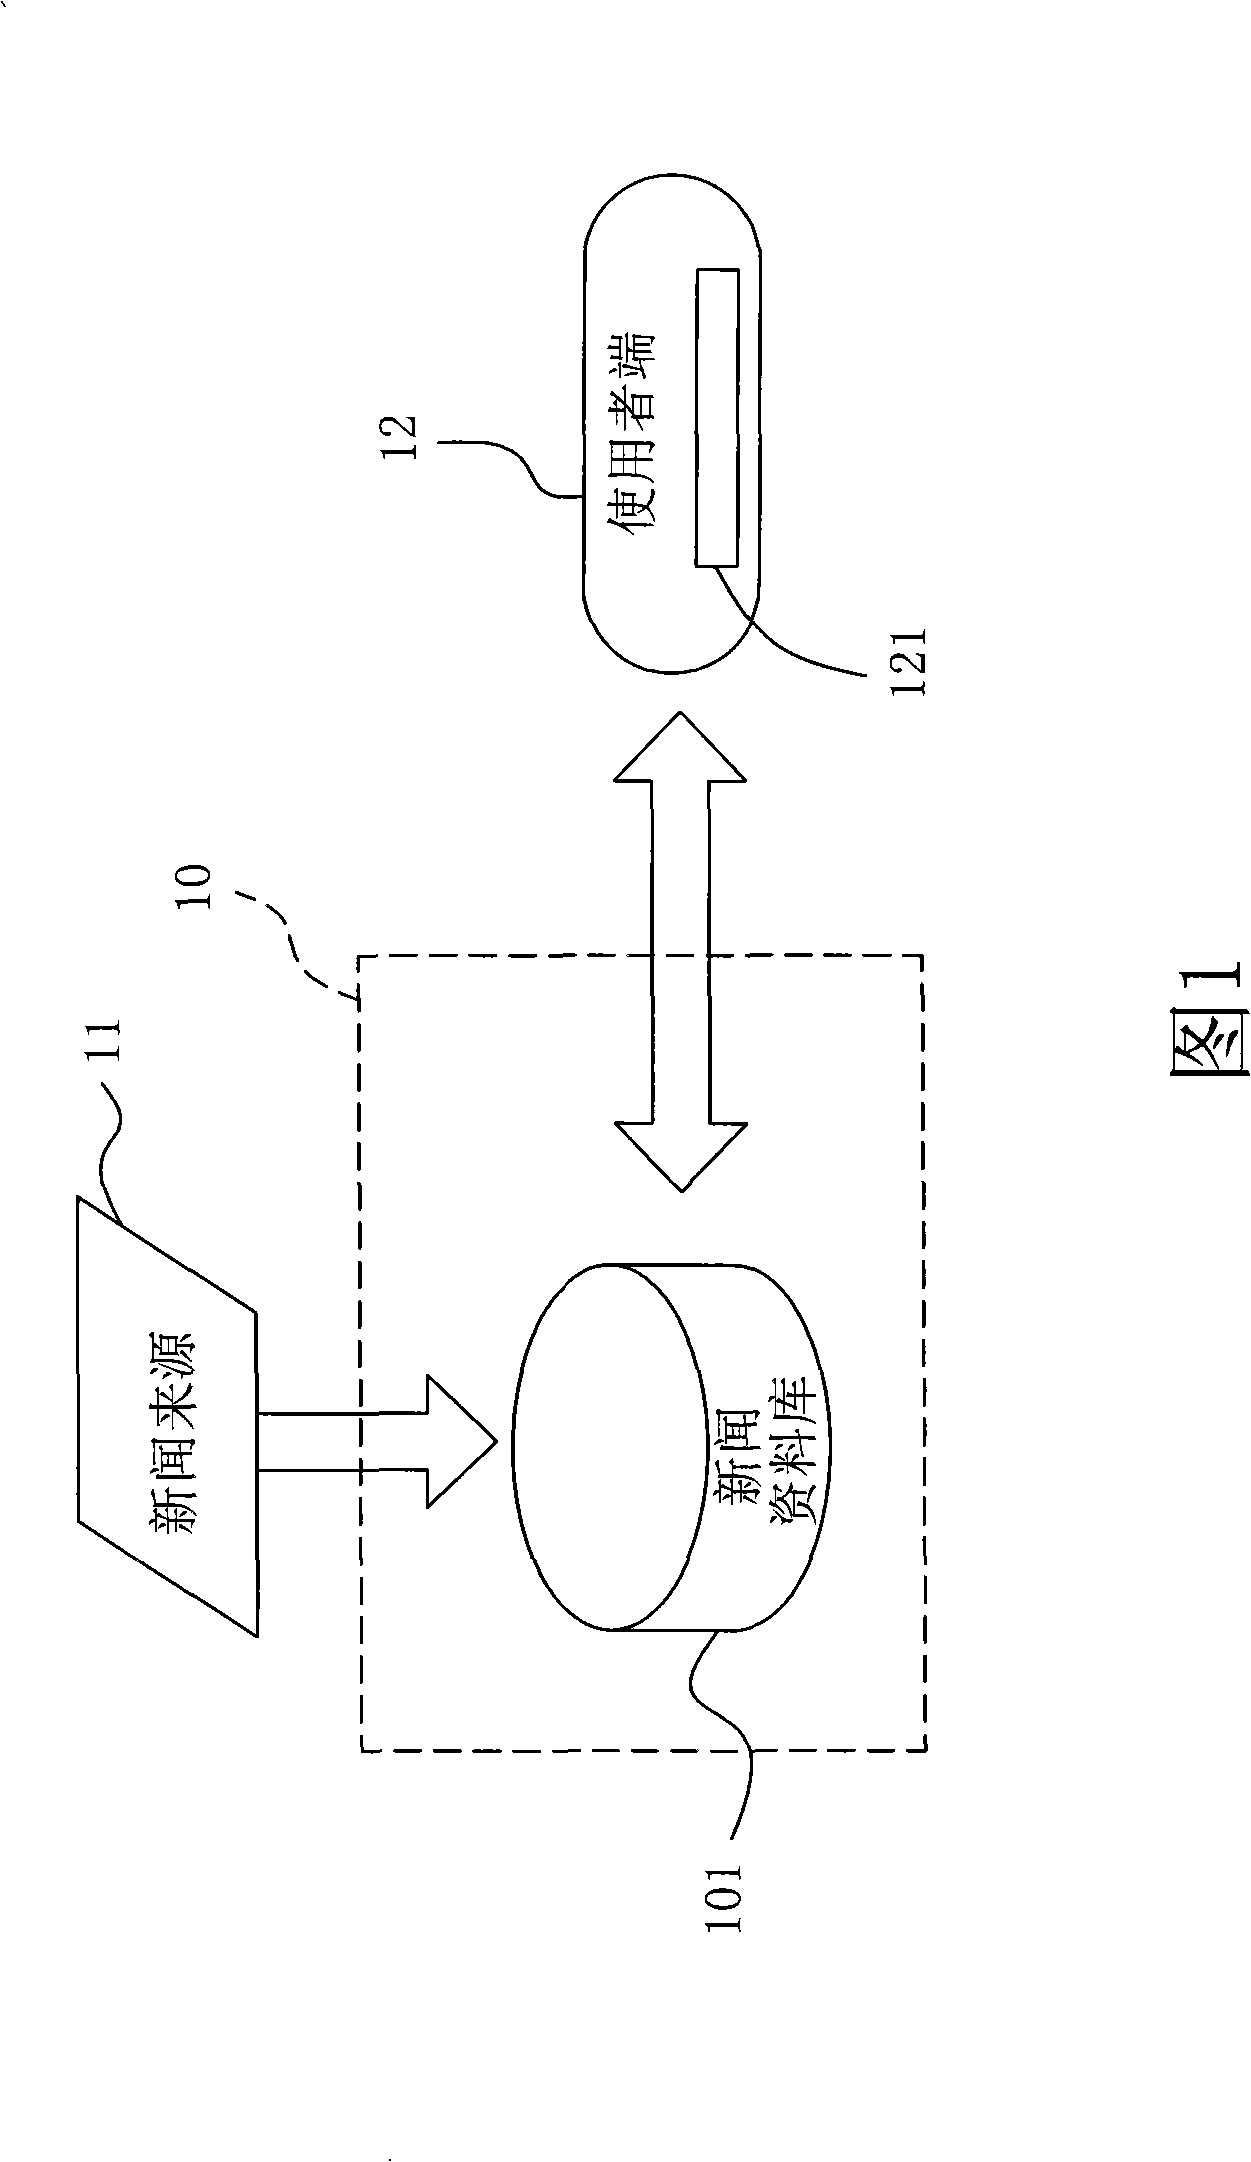 Information sorting retrieval system and method